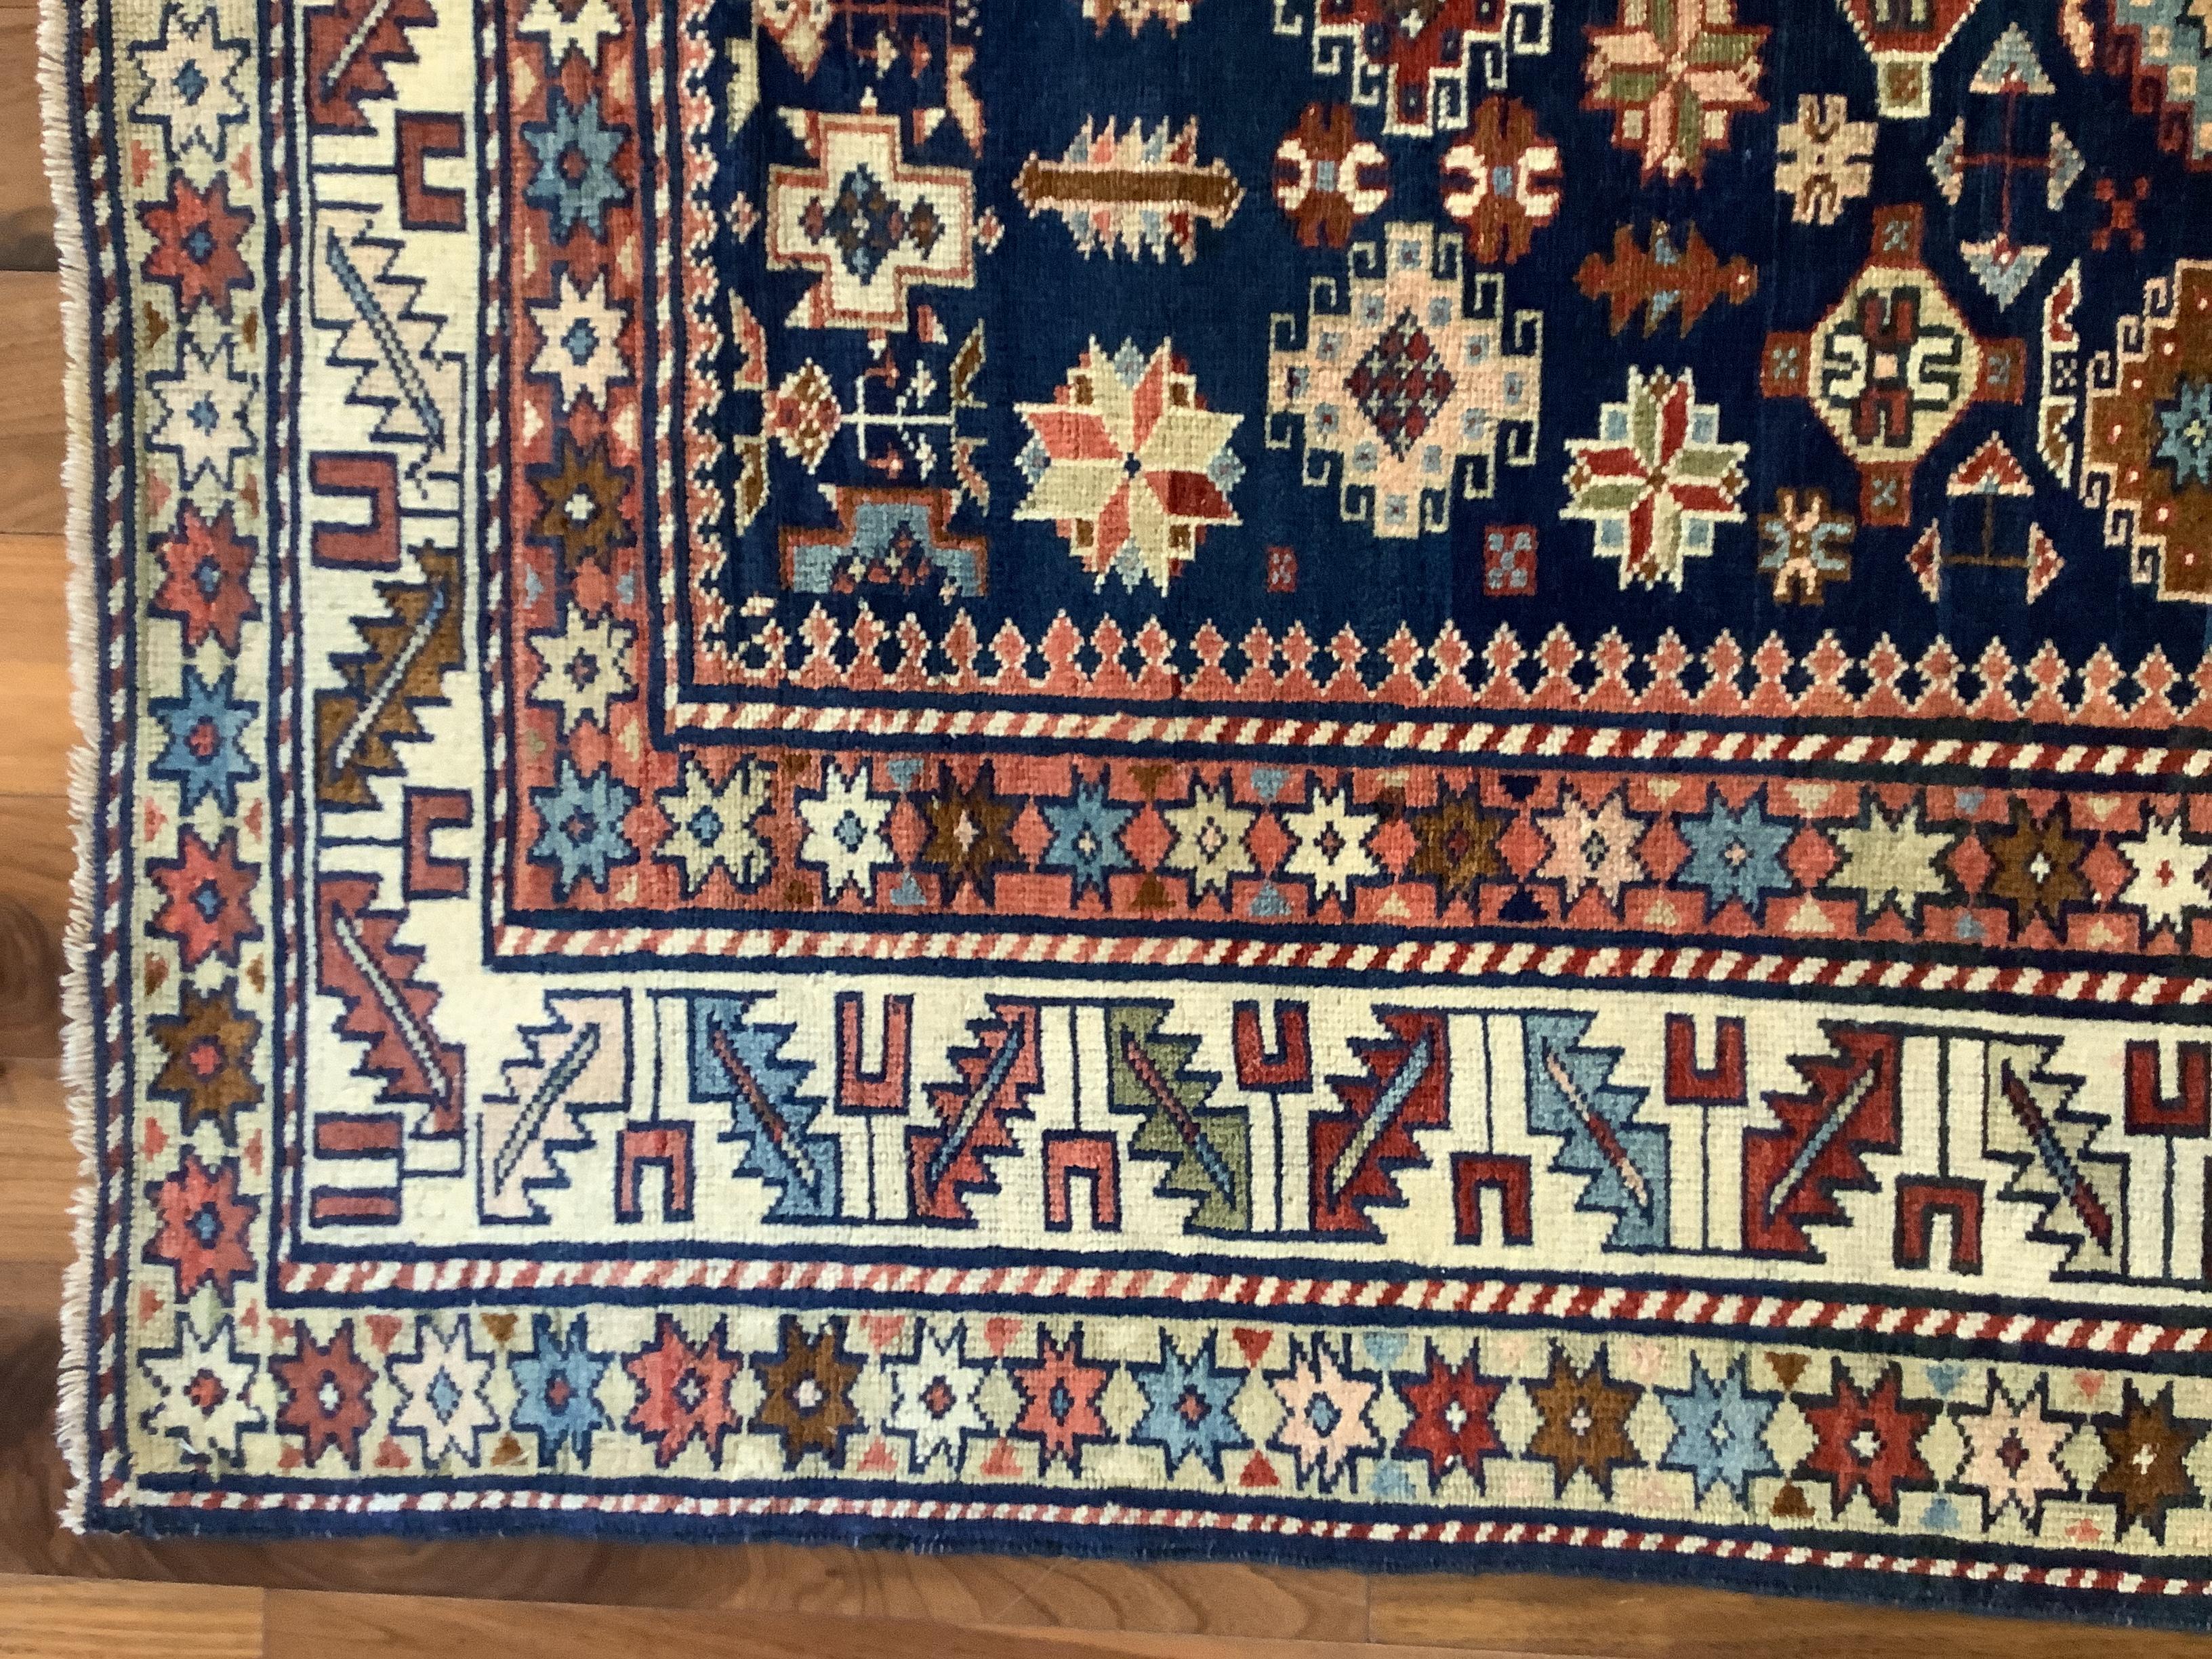 Chi Chi rugs, with their rich variety of small-format geometric motifs which hermetically cover the field and borders, are considered some of the most elaborate Caucasian weavings. The midnight blue field of this piece, with a beautiful Abrash color